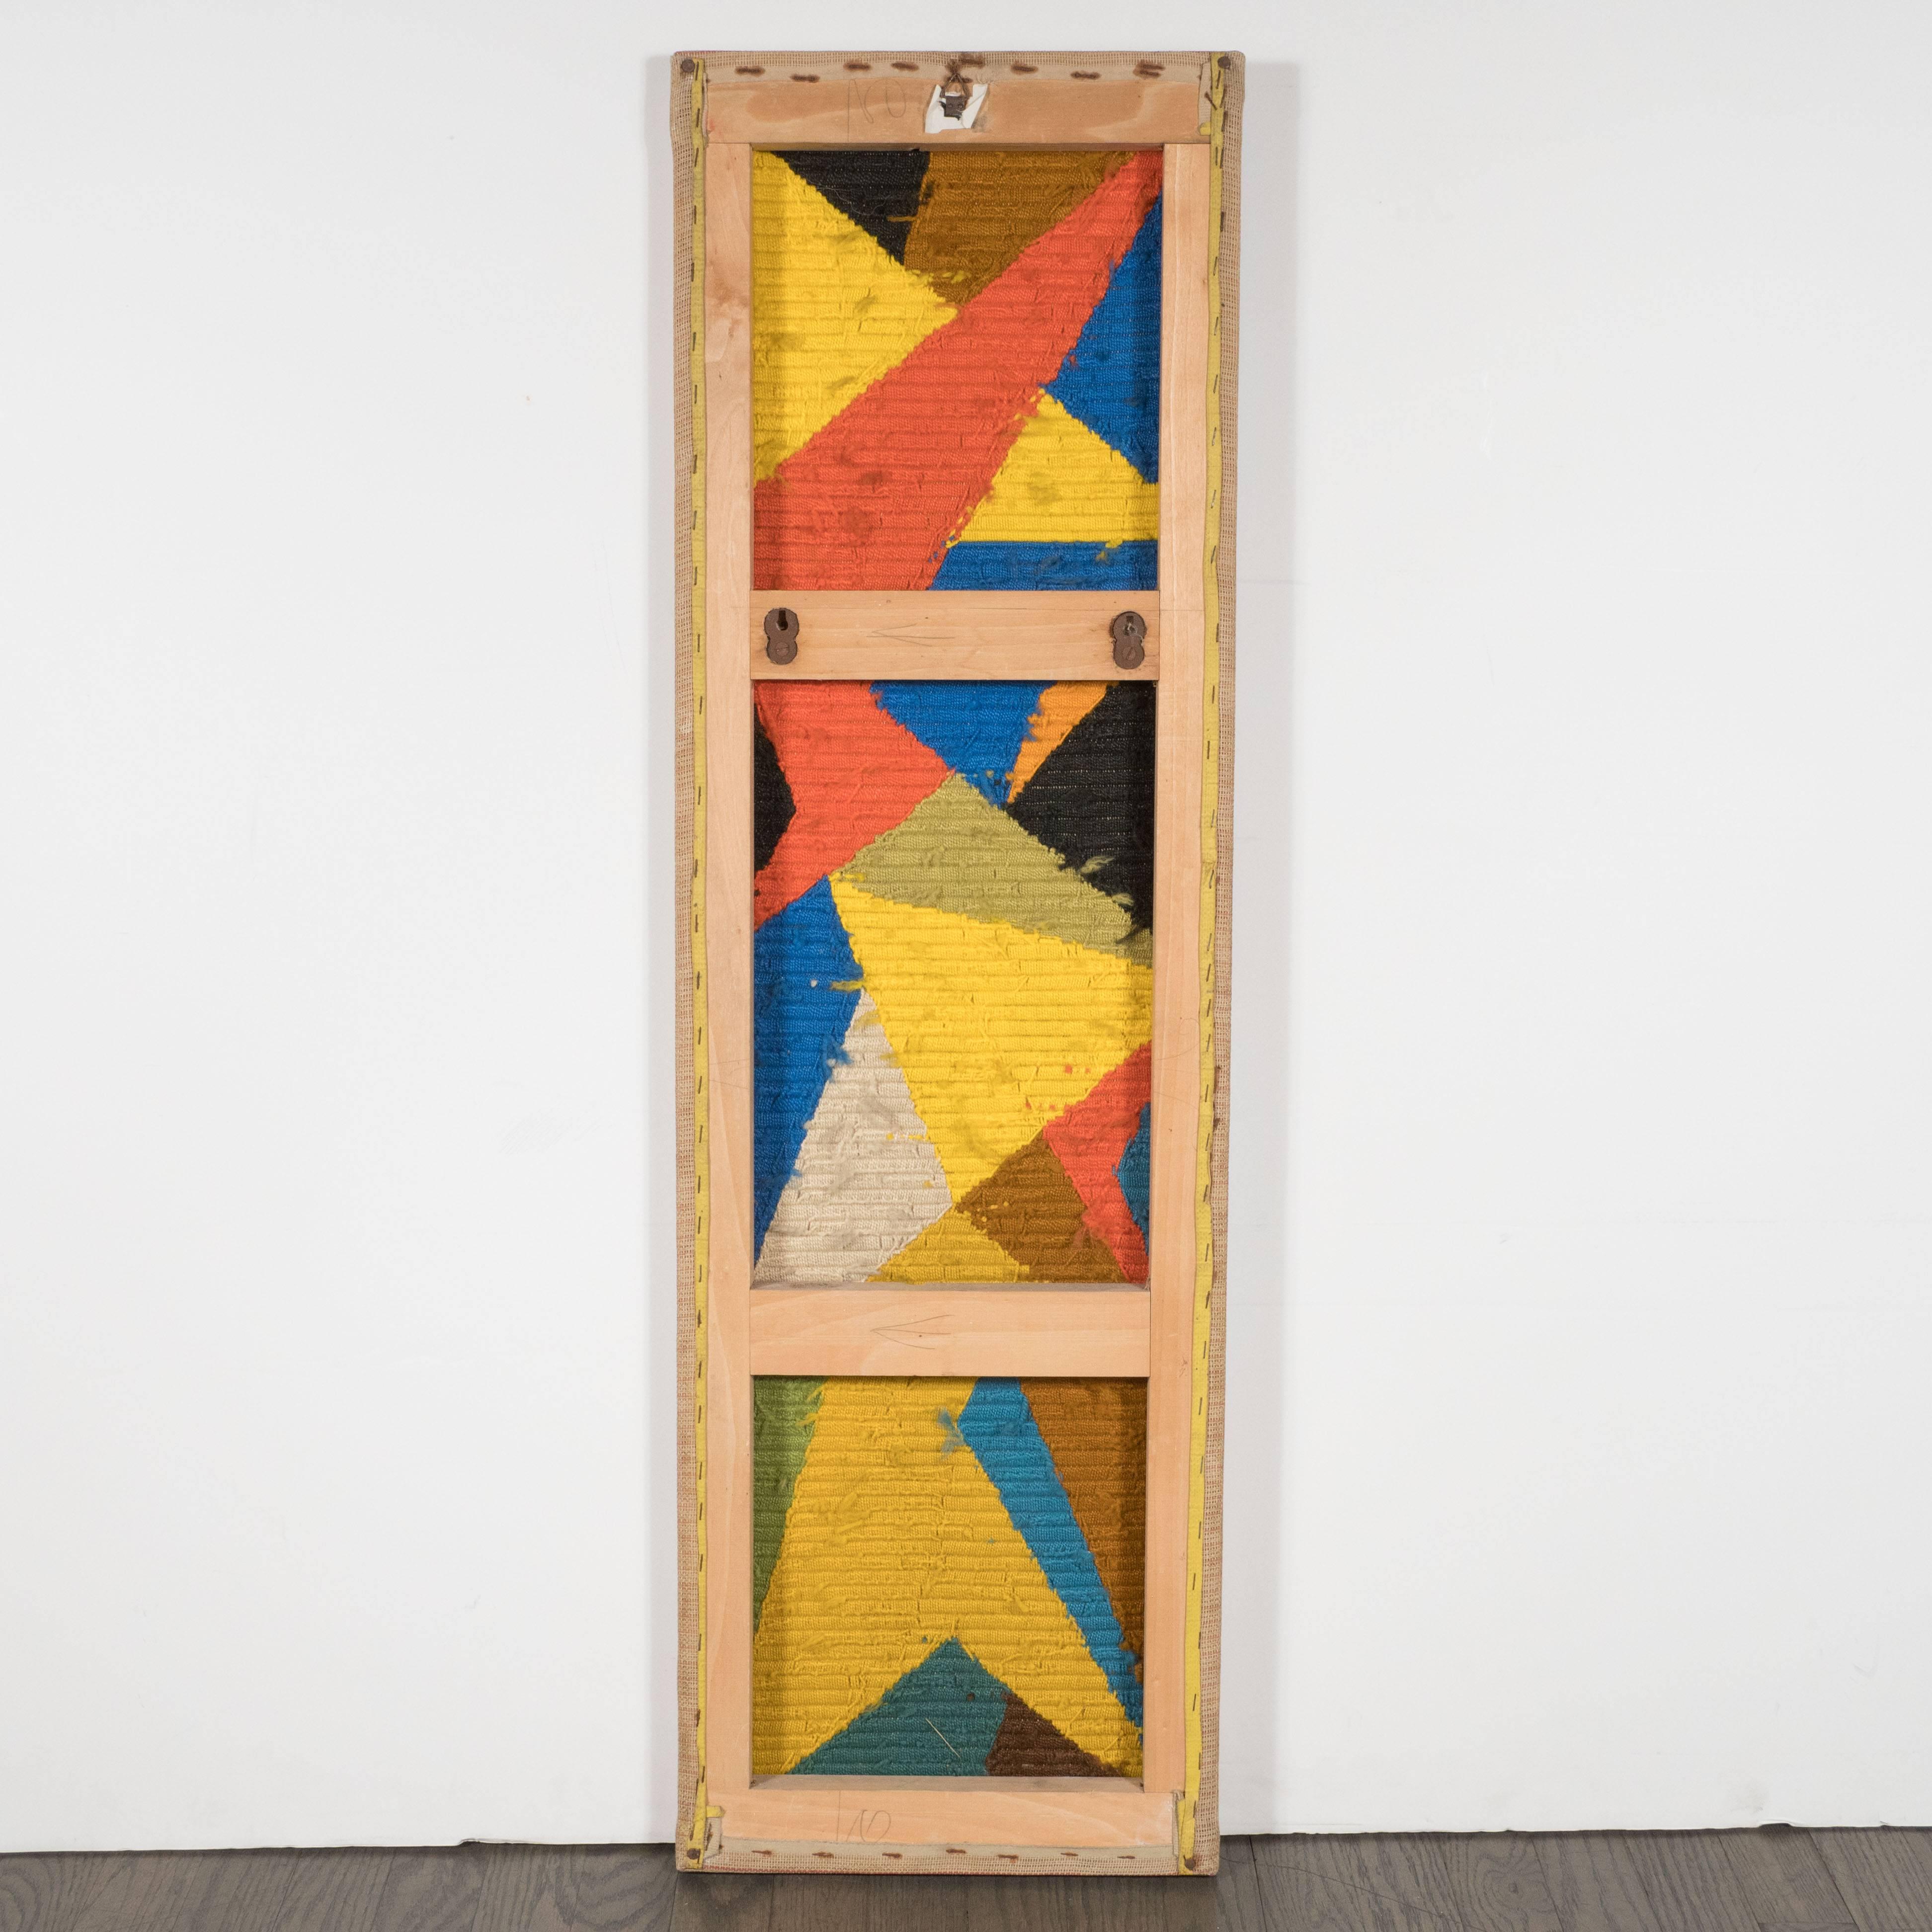 This compelling Mid-Century Modernist tapestry wall hanging was realized in tightly woven, hand-knotted cotton textile. The composition features an array of intersecting planes in a vibrant palate that includes hues of persimmon, hazelnut, lemon